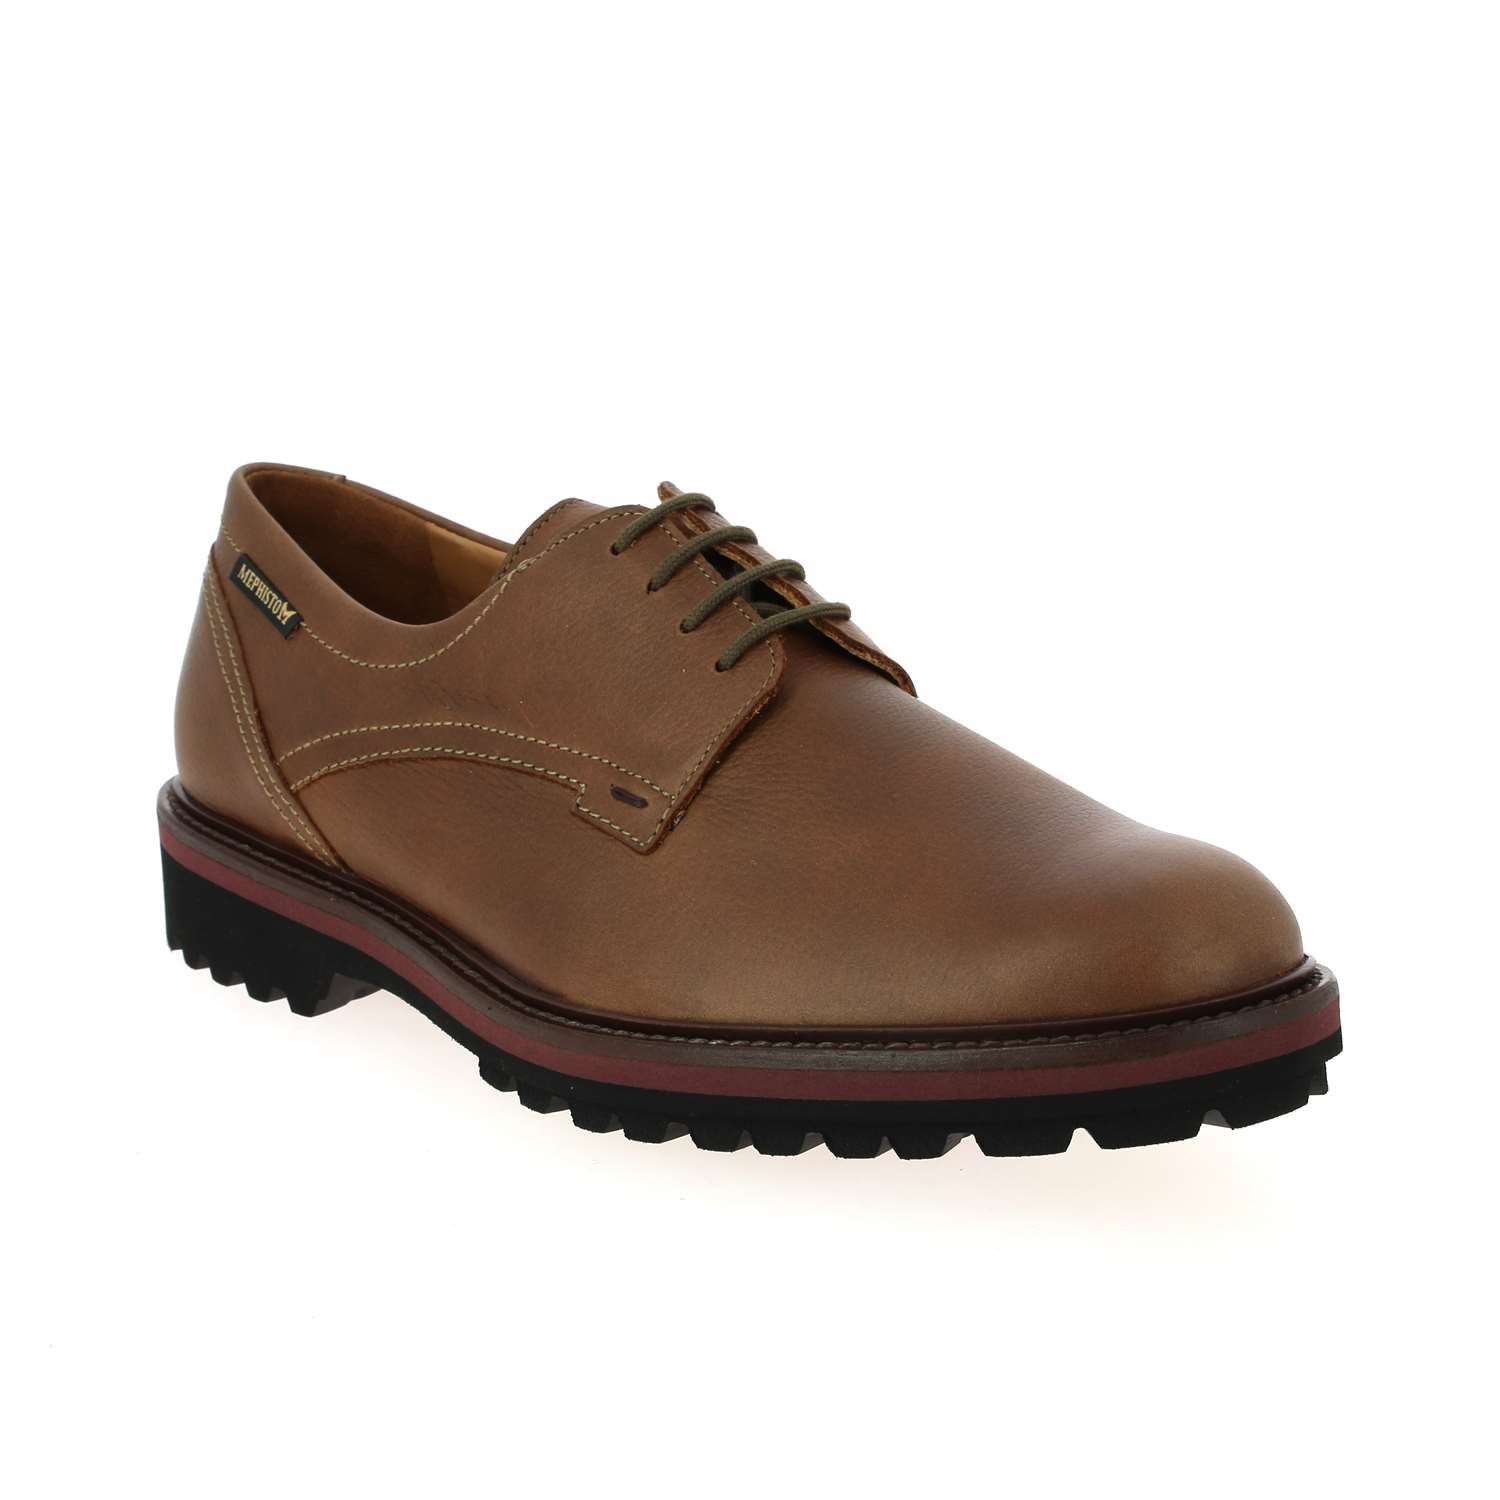 Chaussures à lacets Mephisto Homme Chaussures à lacets MEPHISTO 42 marron Homme Chaussures Mephisto Homme Chaussures à lacets Mephisto Homme 